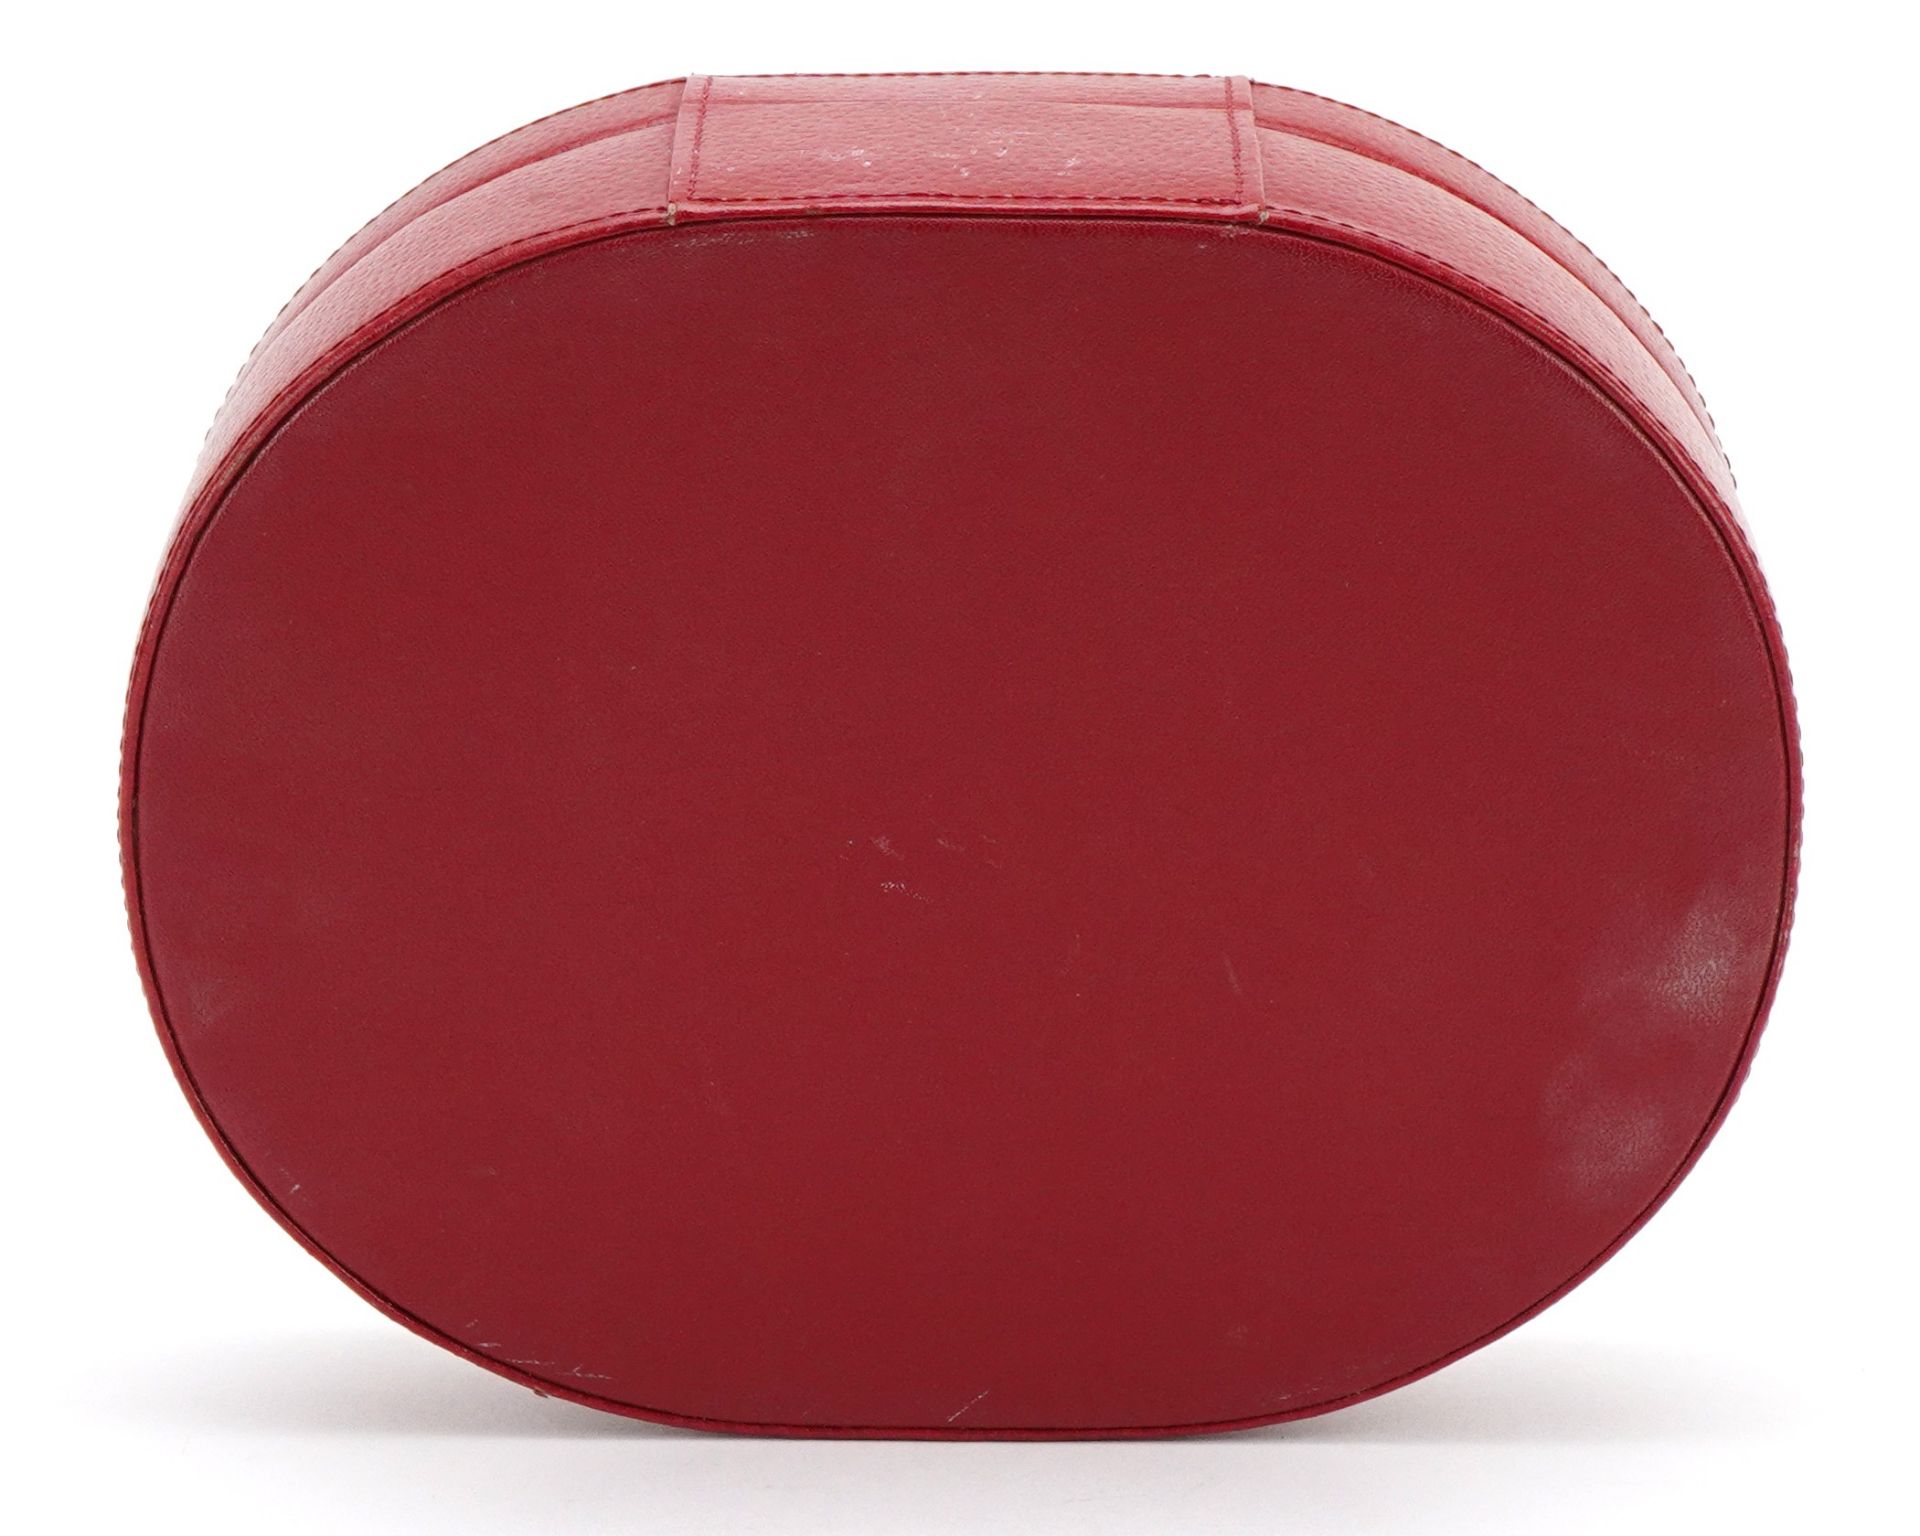 Red leather and suede wristwatch display case, 7.5cm H x 23.5cm W x 18.5cm D - Image 4 of 4